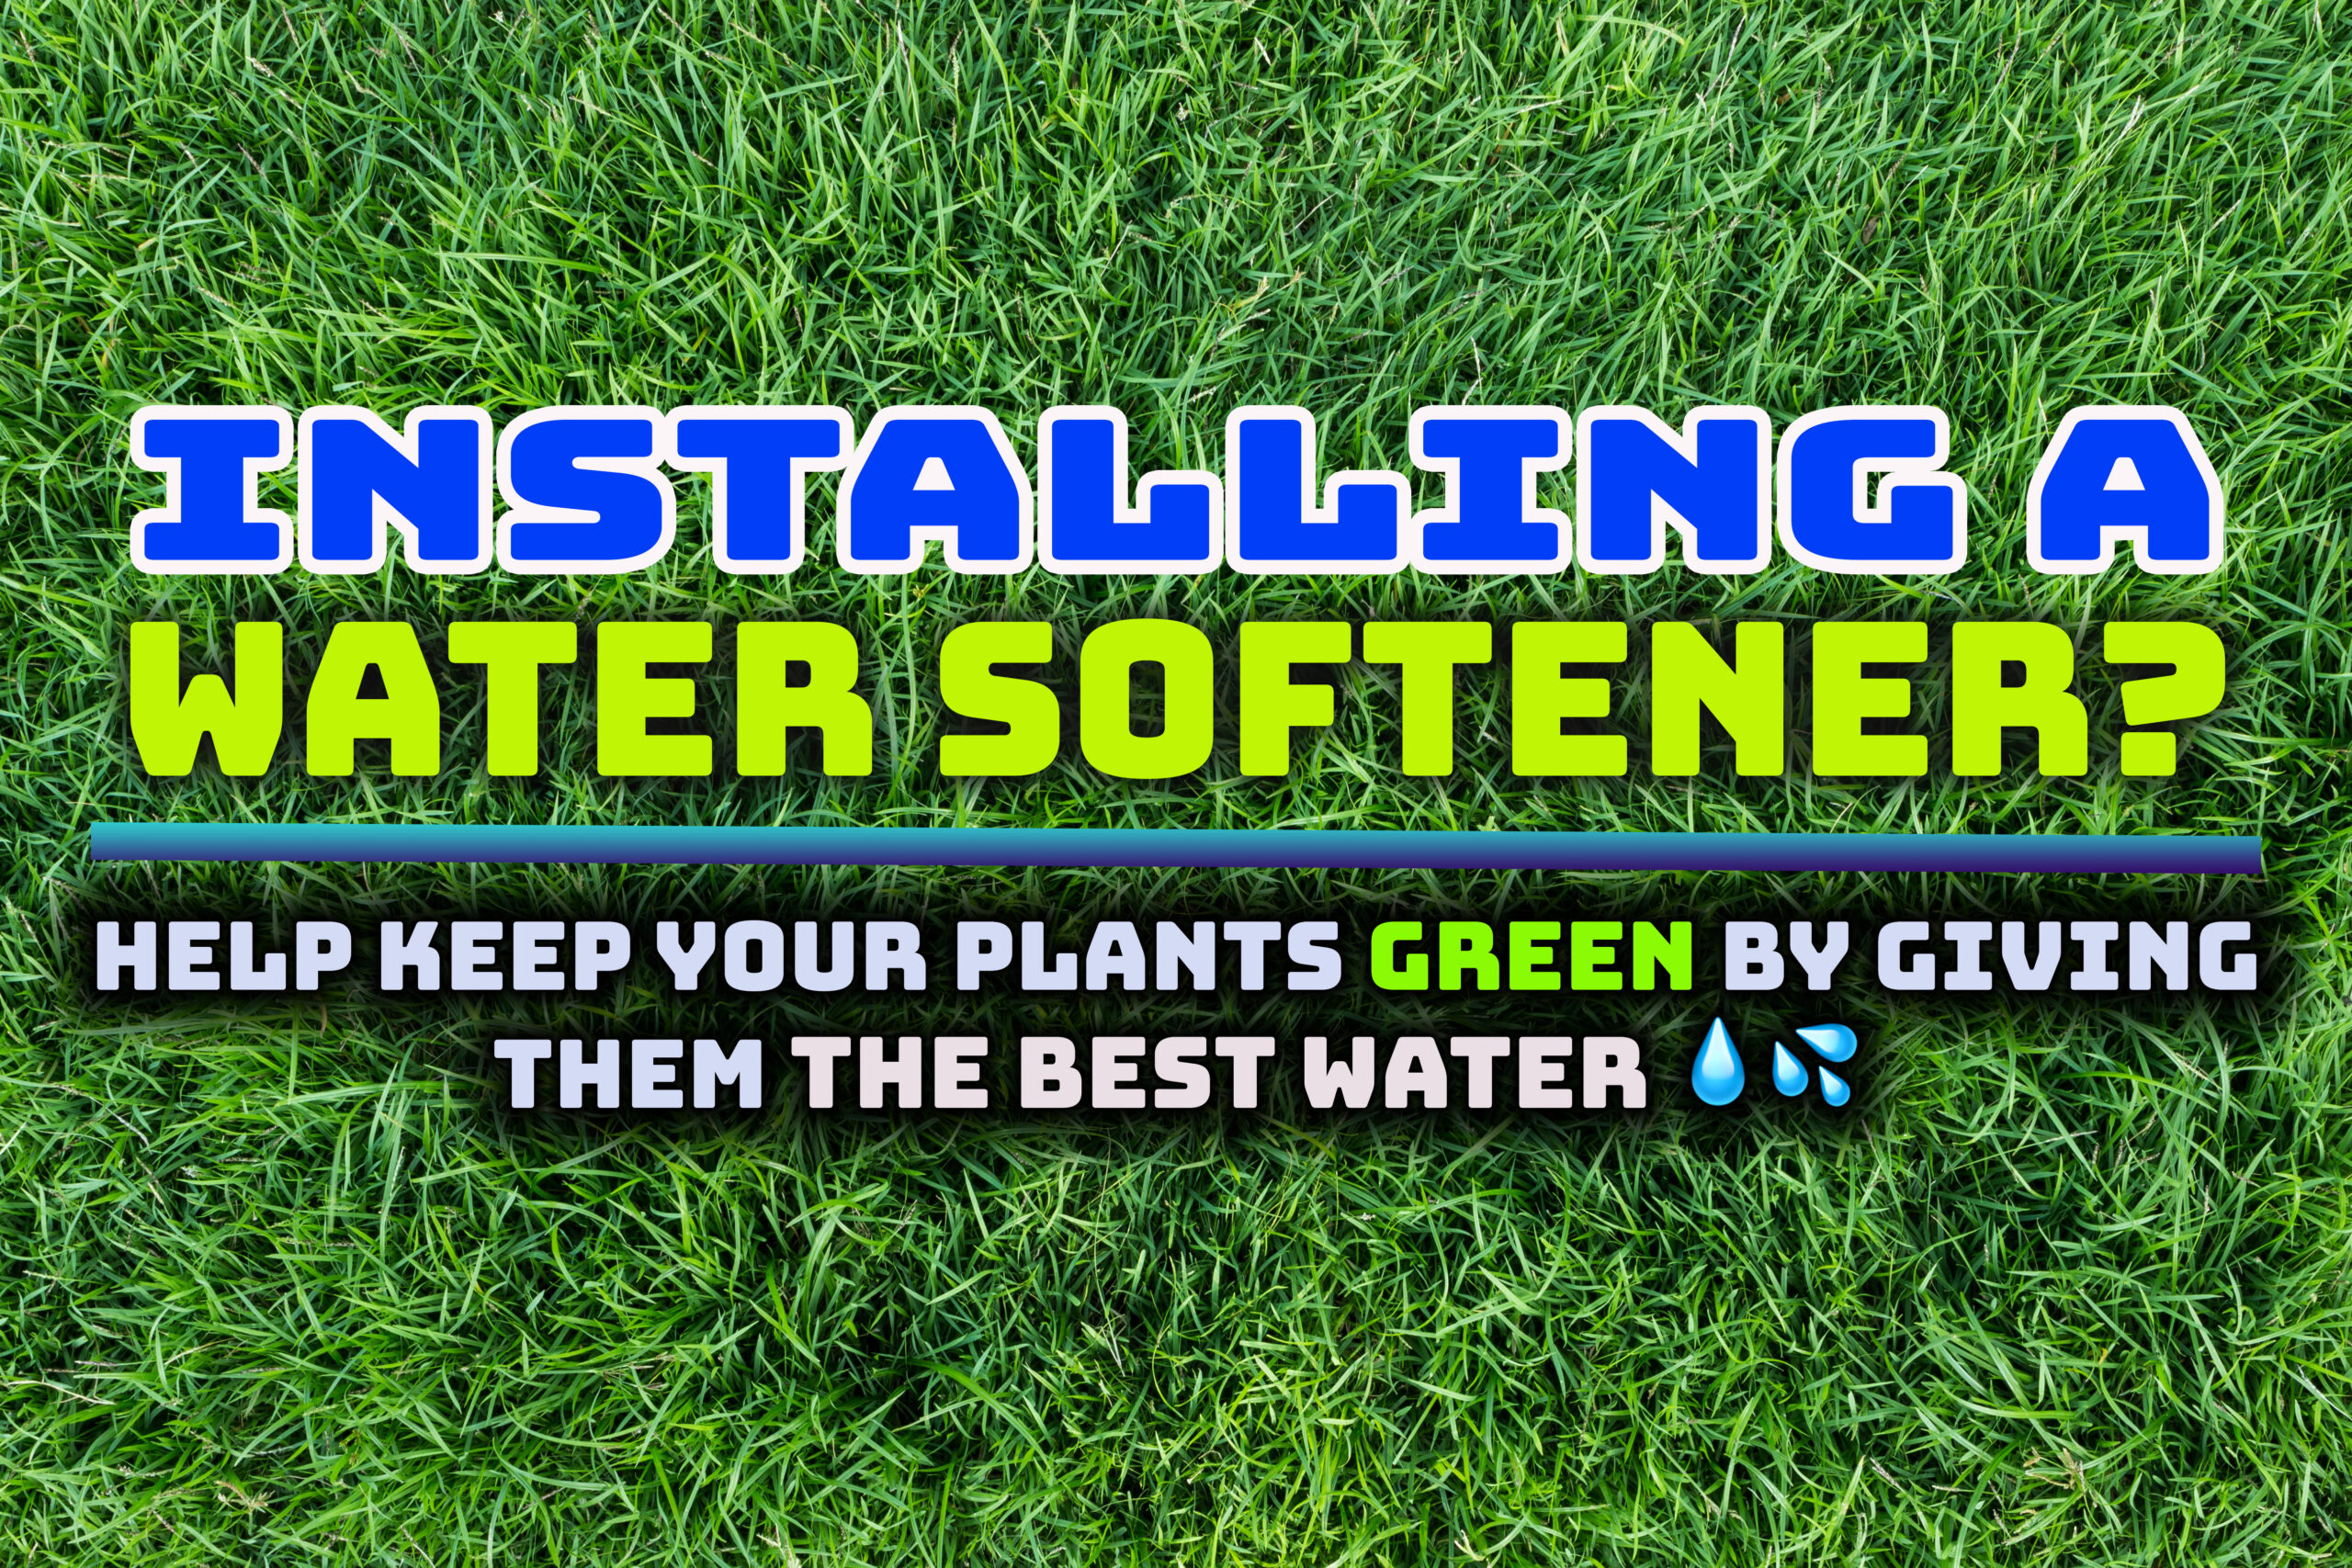 Soft water is not always the best option for your plants. Here are the things you need to do to give your plants the best water.